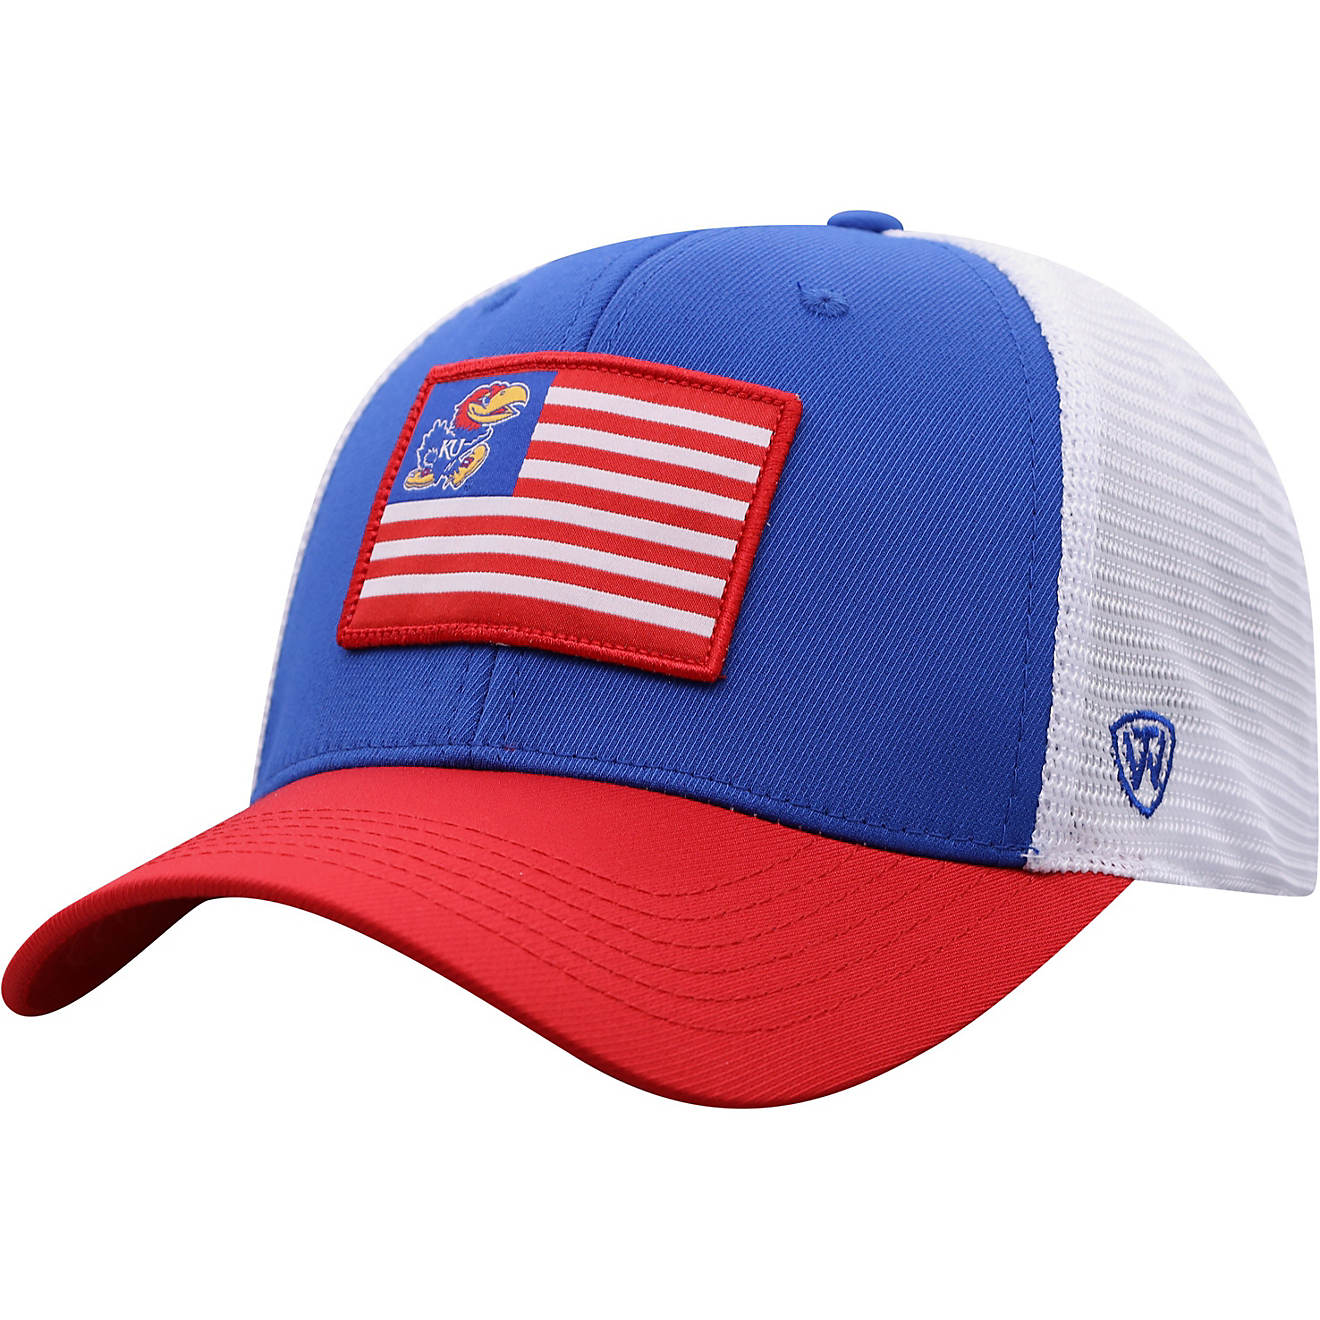 Top of the World Men's University of Kansas Pedigree One Fit Cap                                                                 - view number 1